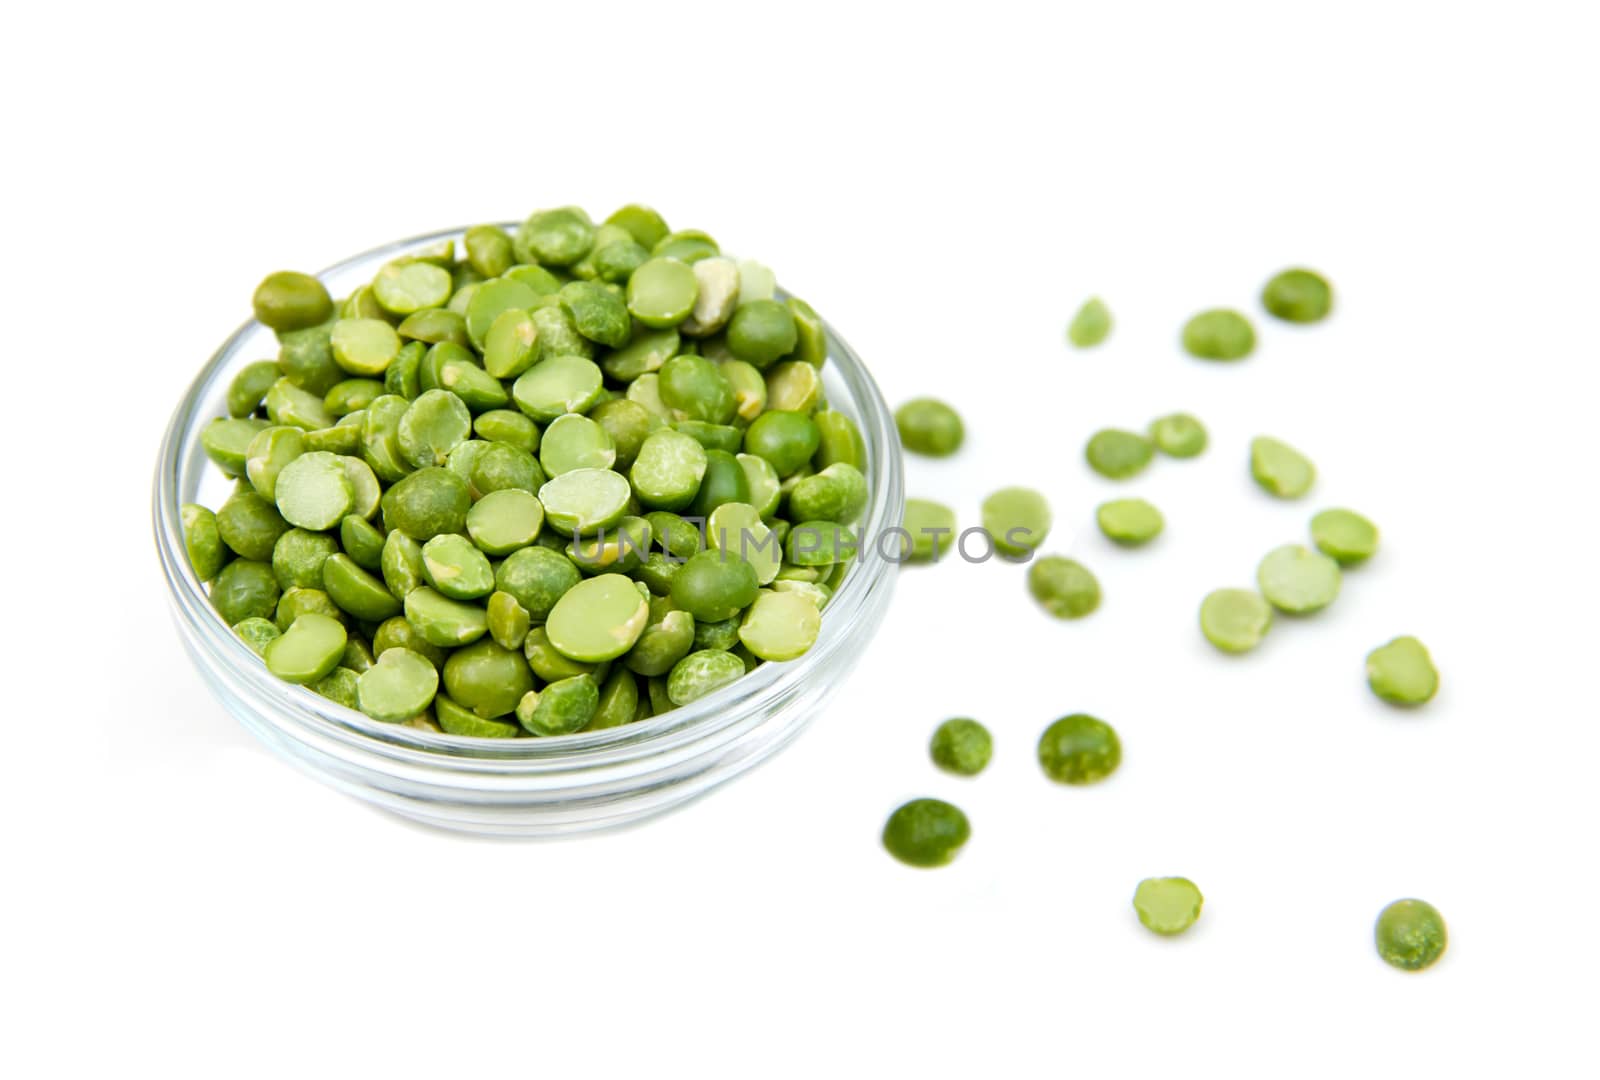 Dried peas in bowl on white background